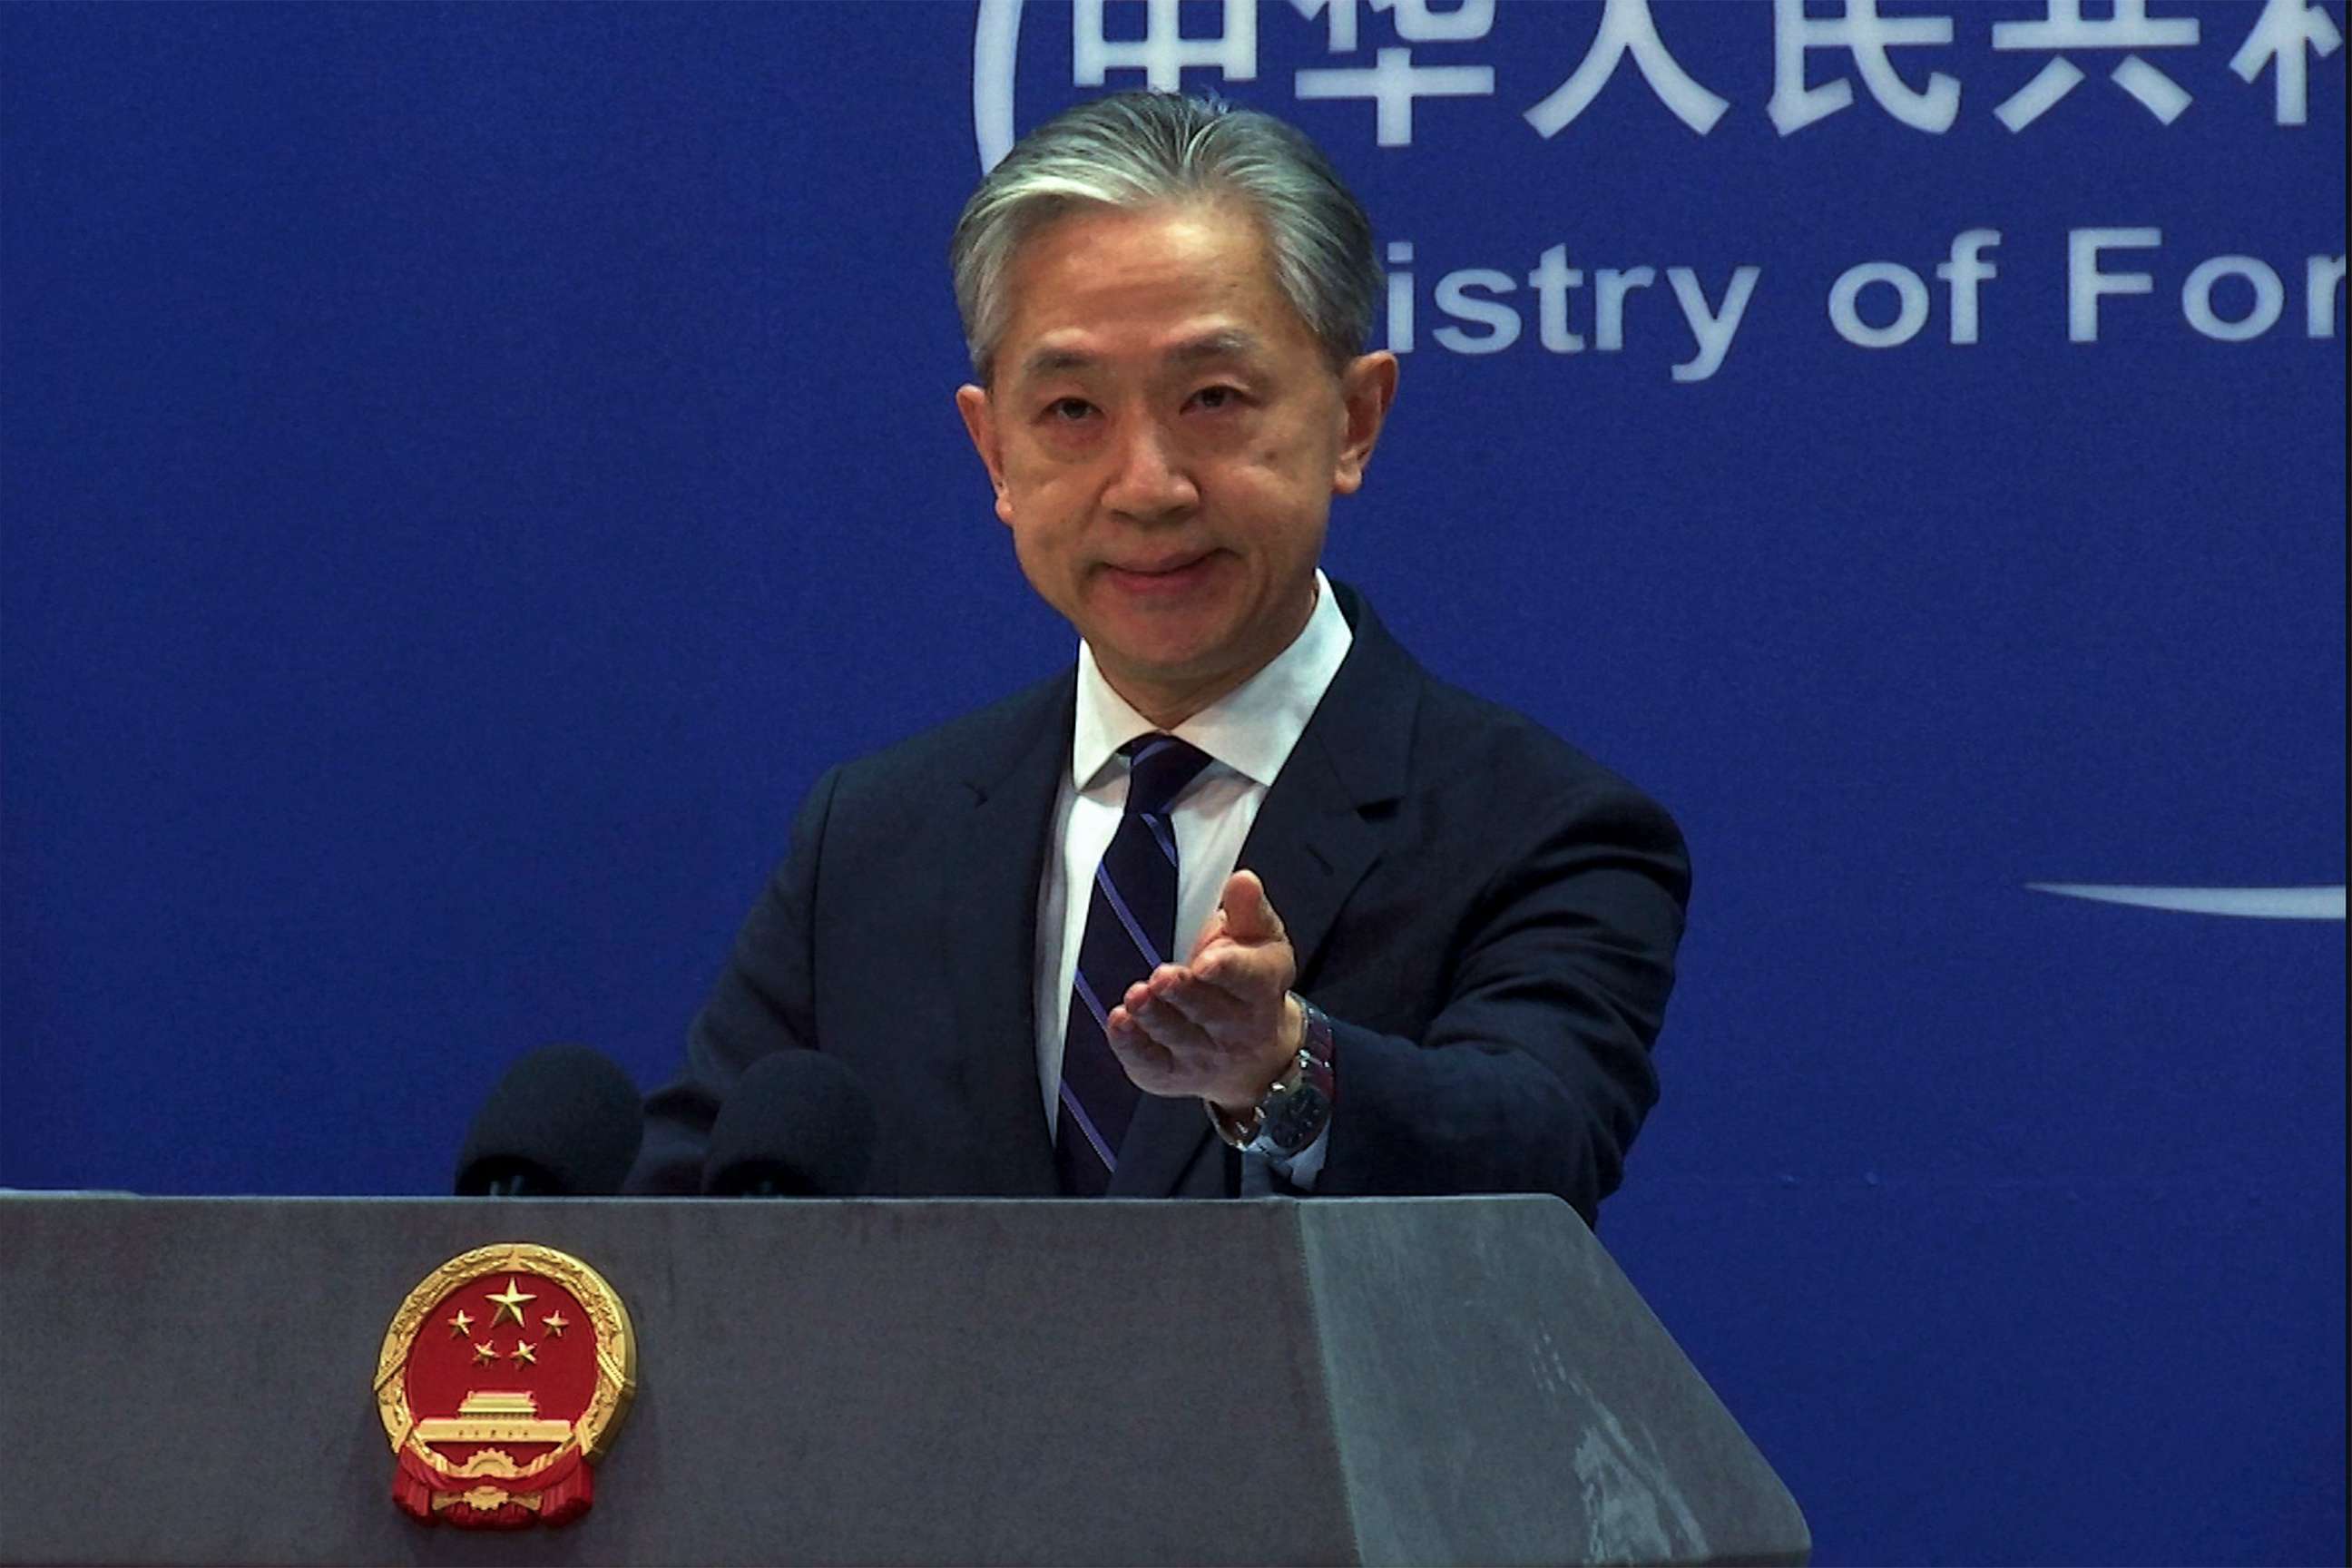 PHOTO: In this image taken from video, Chinese Ministry of Foreign Affairs spokesperson Wang Wenbin gestures as he speaks during a press briefing at the ministry's office in Beijing, China, on Feb. 13, 2023.